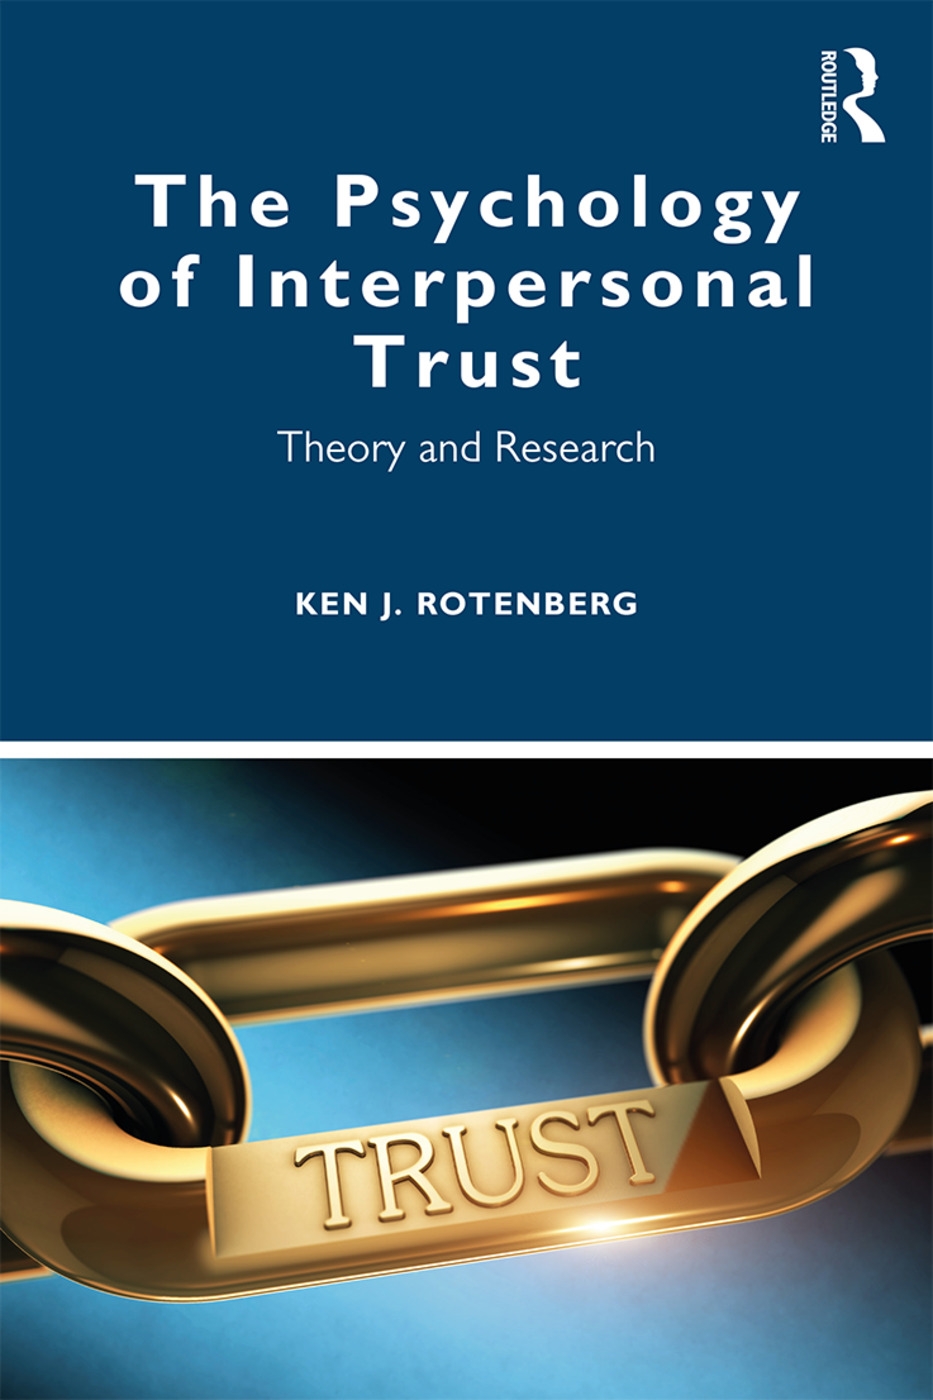 The Psychology of Interpersonal Trust: Theory and Research